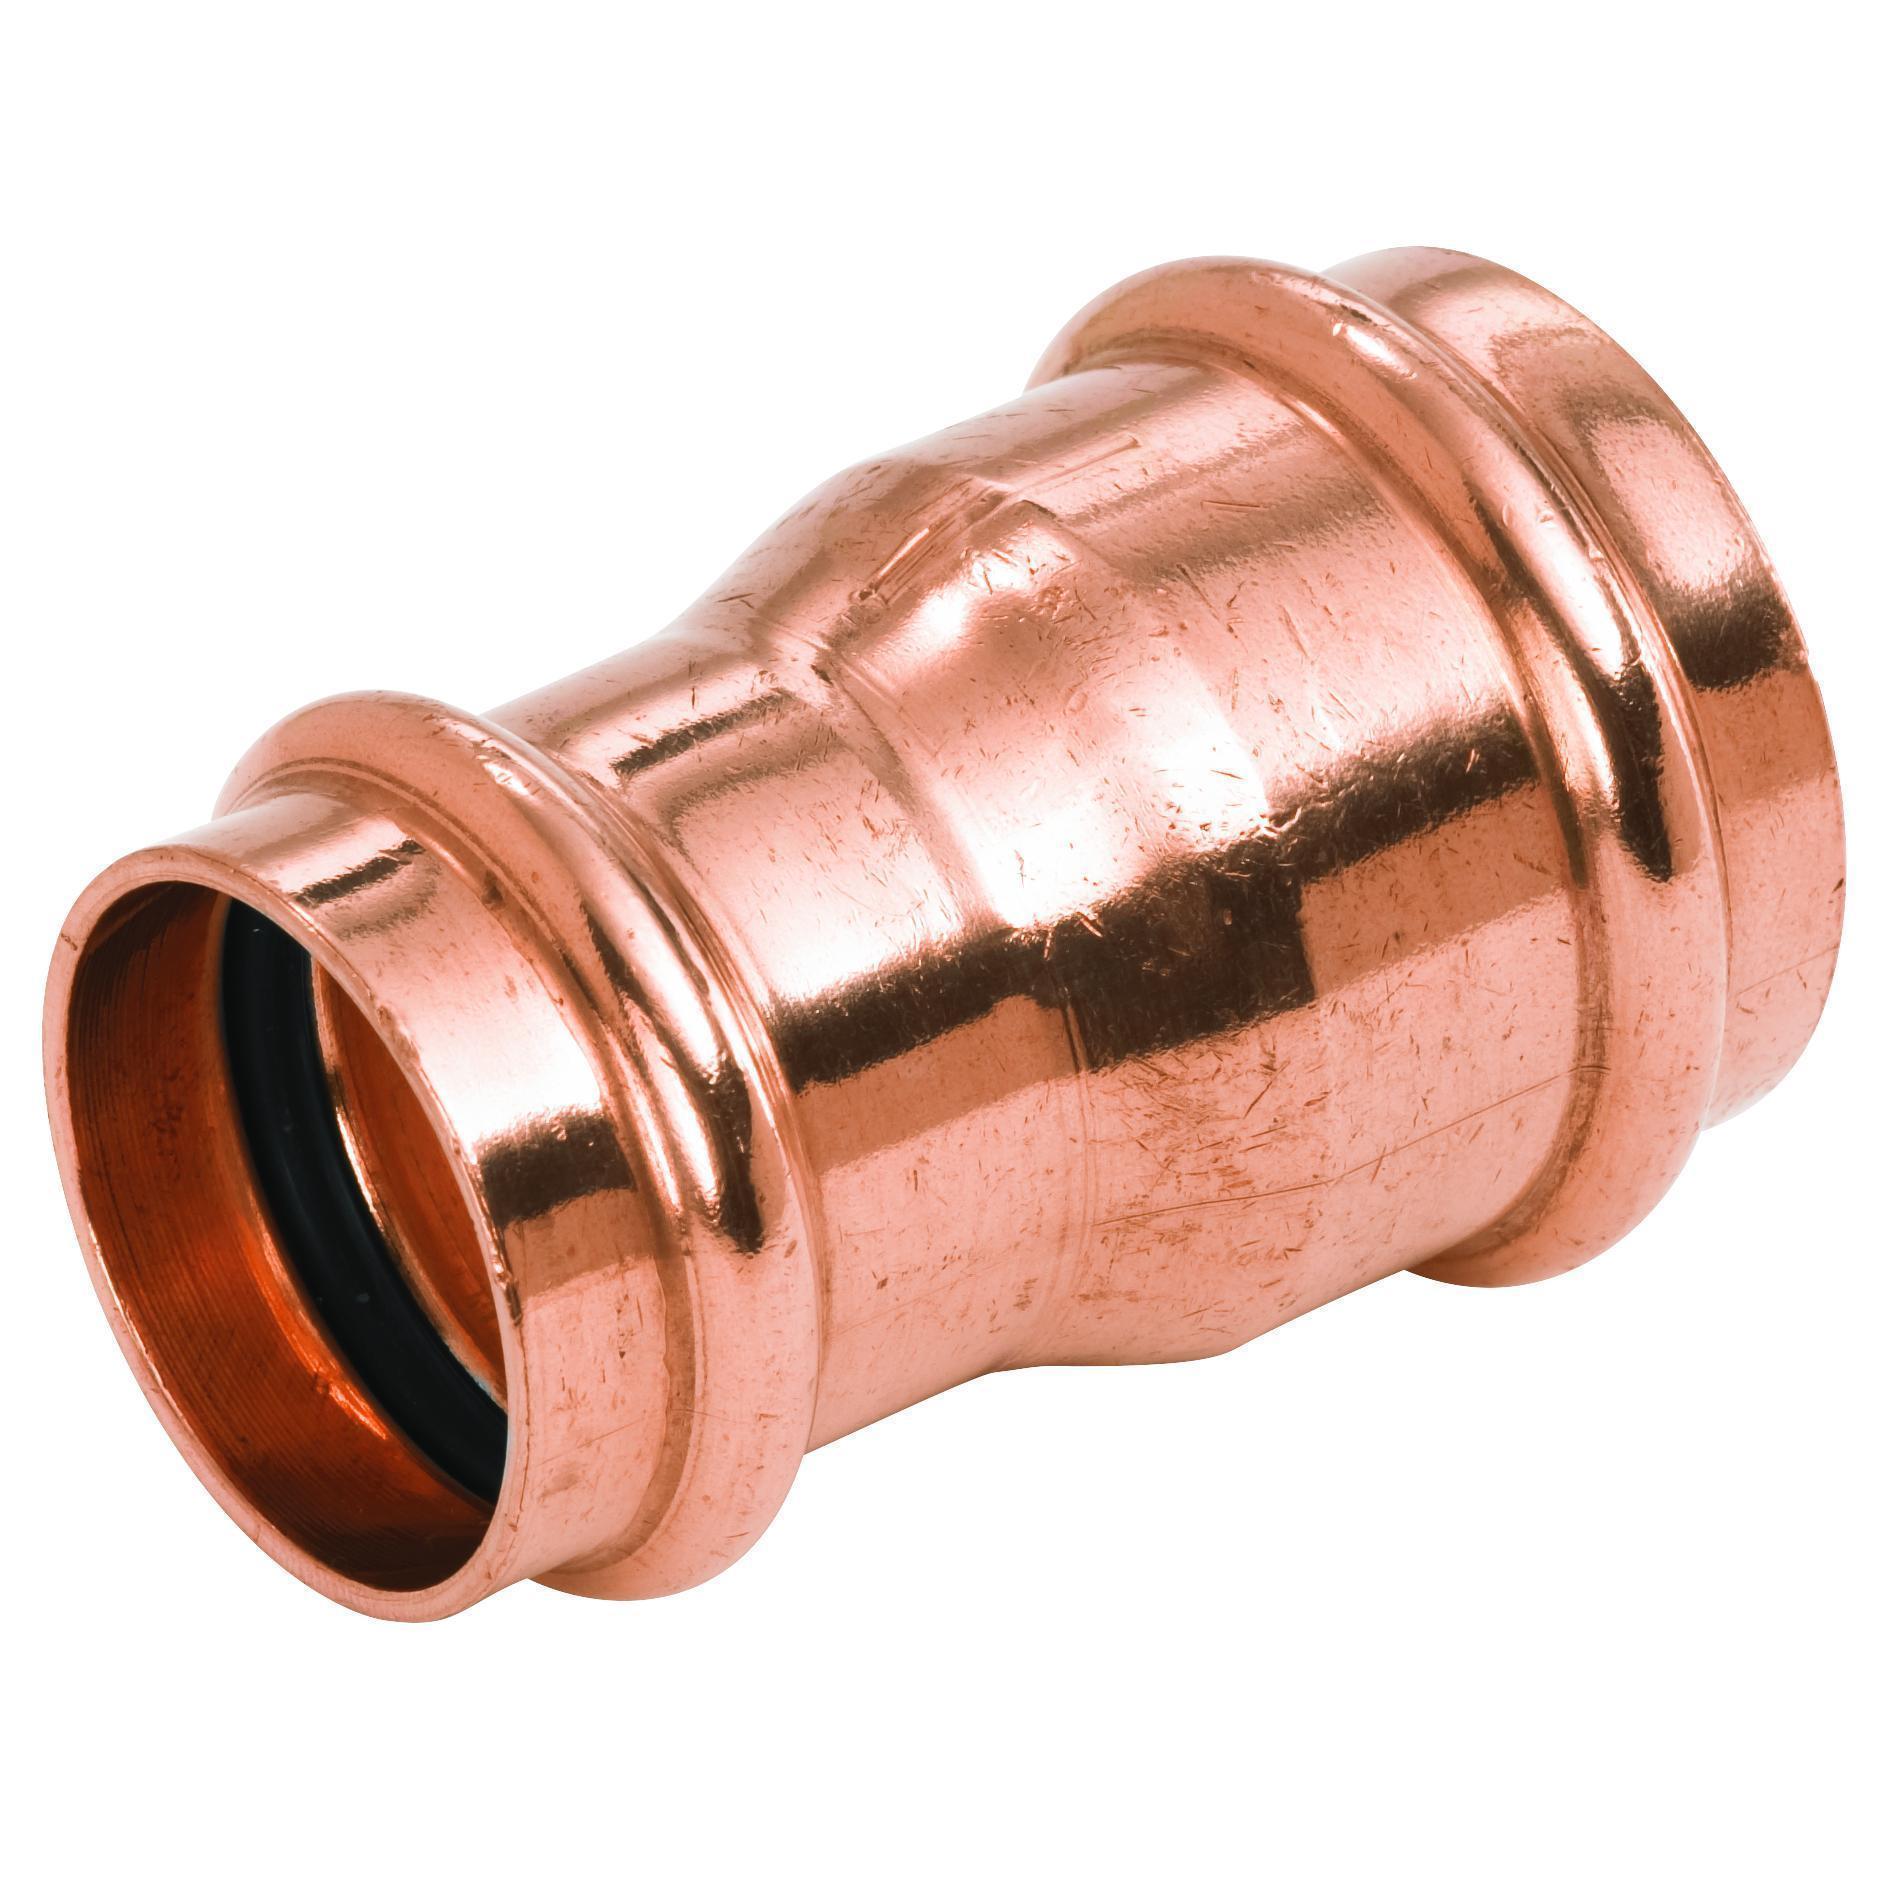 NIBCO® Press System® 9003950PC PC600-R Reducing Coupling, 4 x 3 in Nominal, Press End Style, Wrot Copper, Domestic